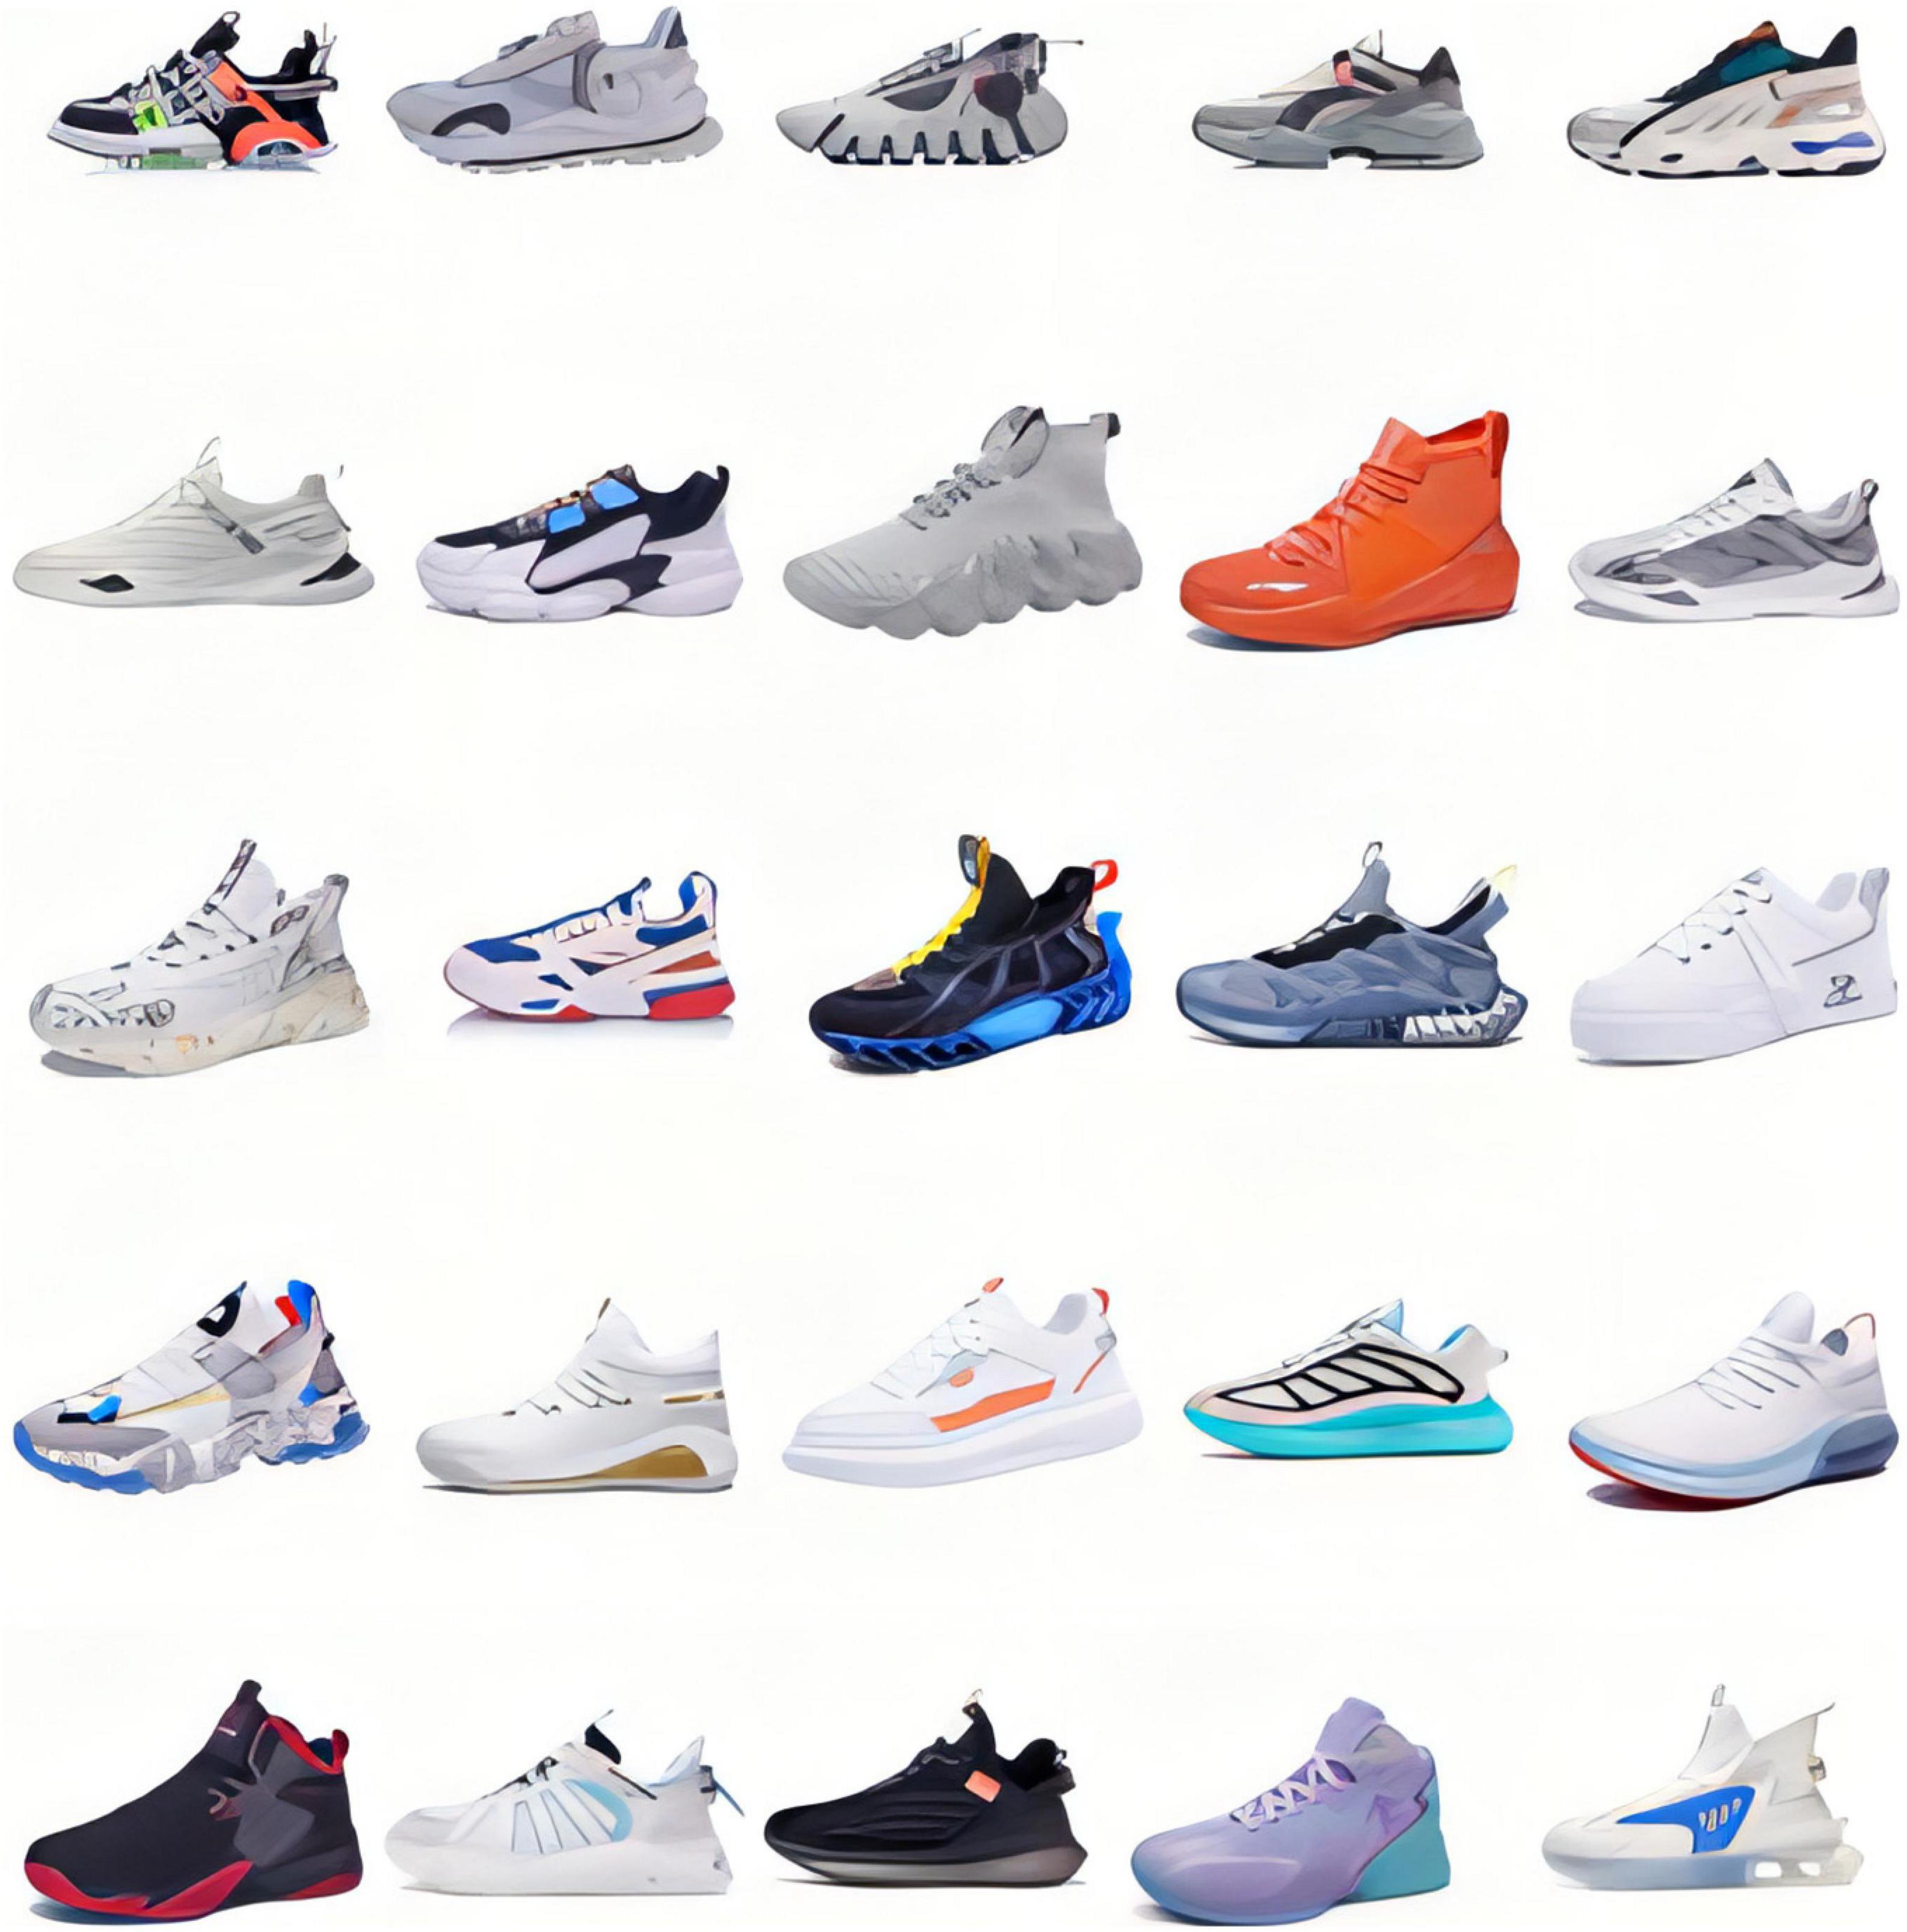 Frontiers | Like/Dislike Prediction for Sport Shoes With ...